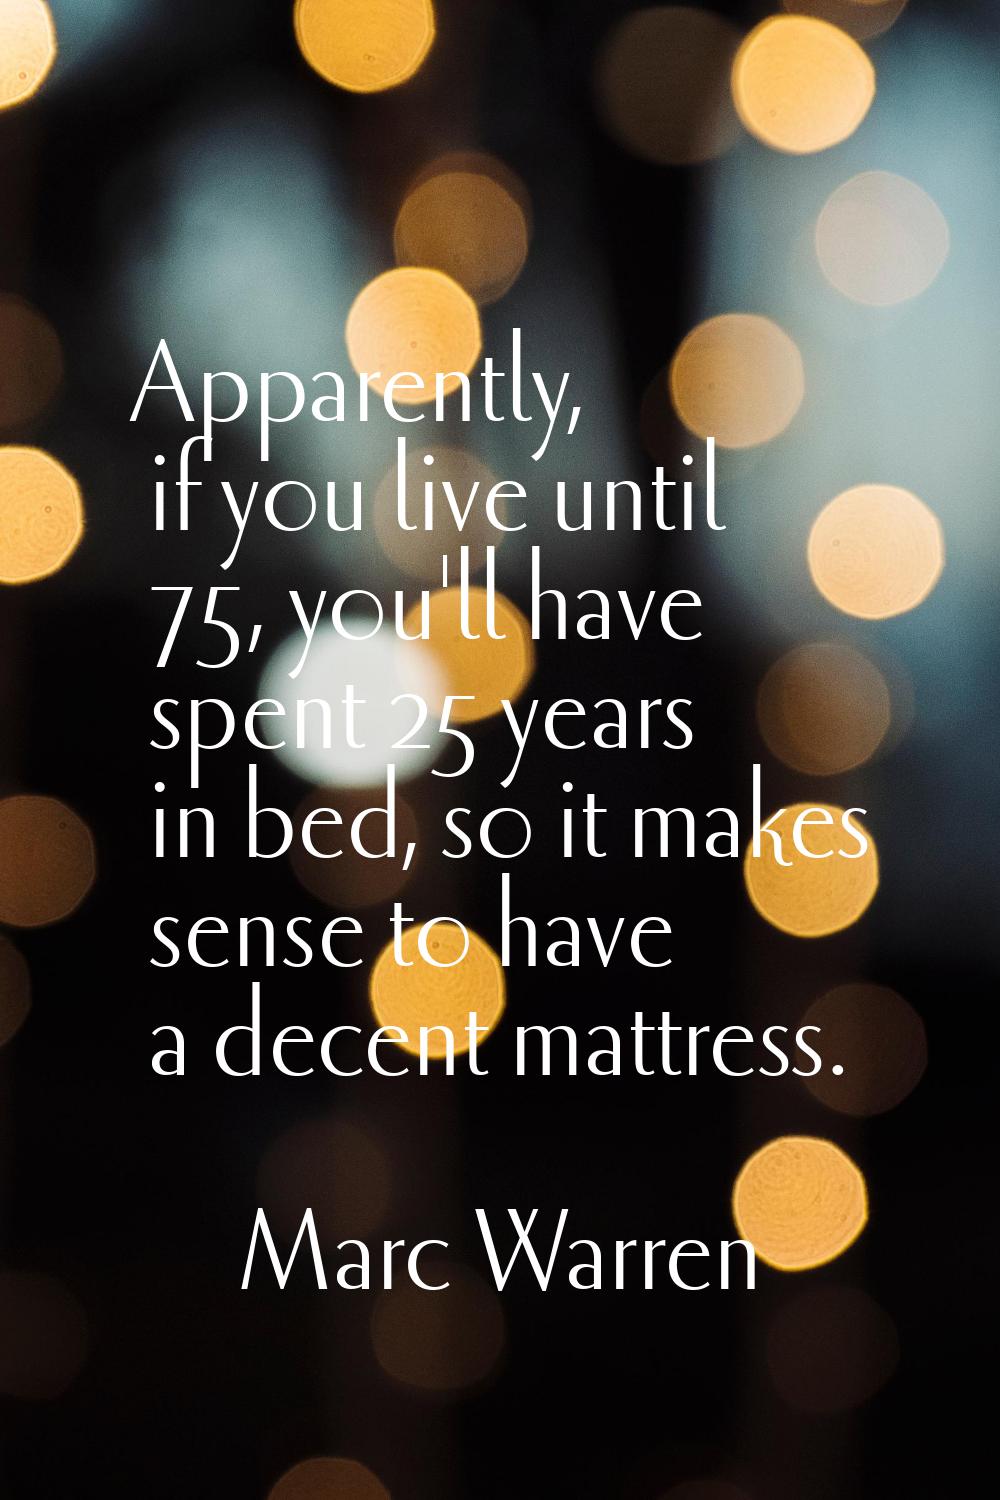 Apparently, if you live until 75, you'll have spent 25 years in bed, so it makes sense to have a de